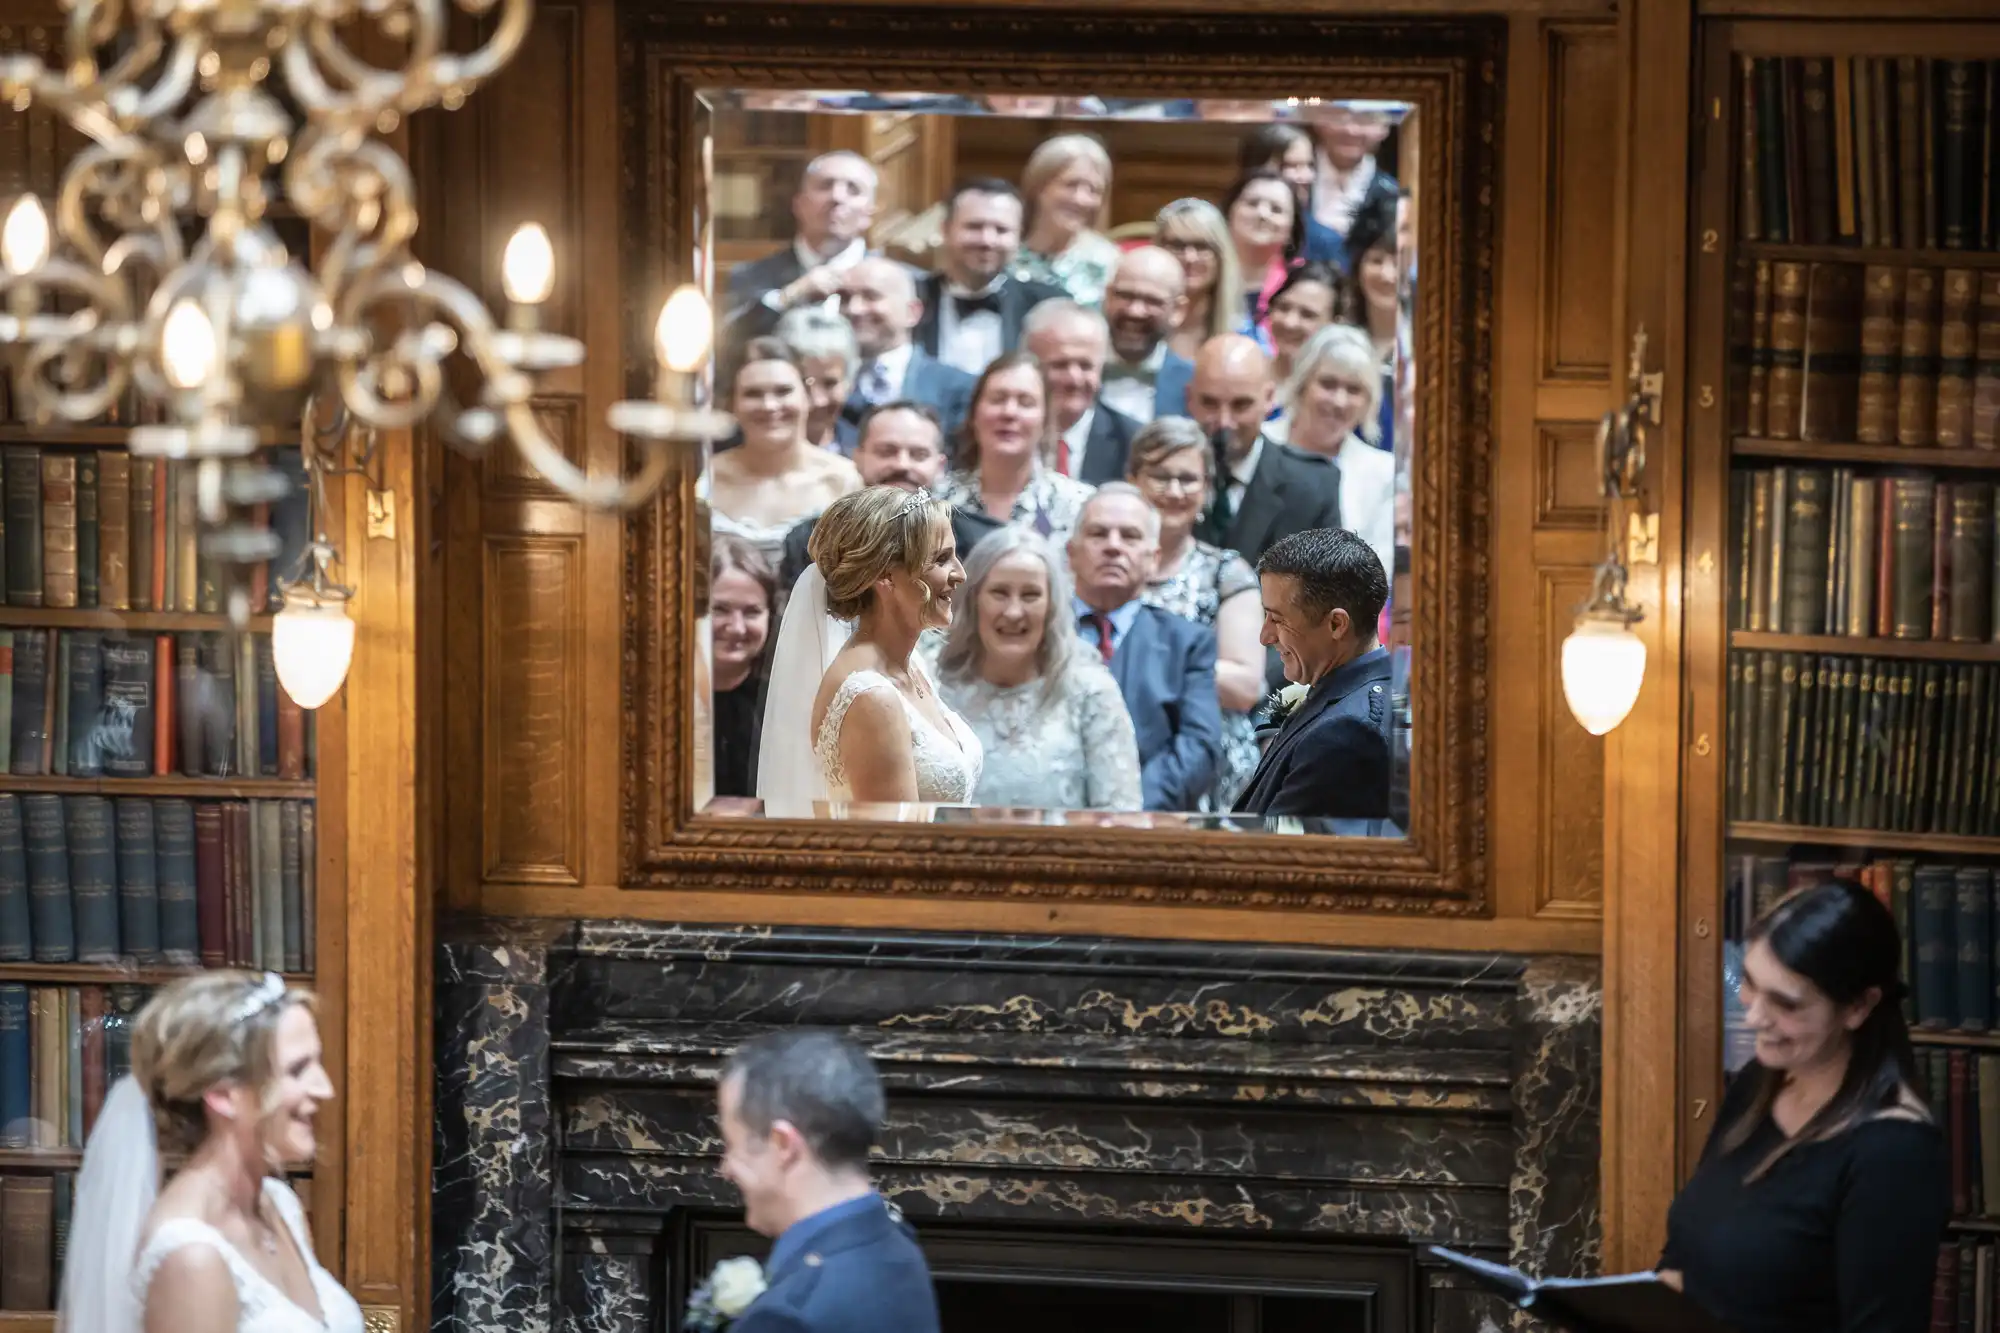 A wedding ceremony with the couple standing at the altar is reflected in a large framed mirror. Guests are seated and watching the ceremony, surrounded by wooden bookshelves and a marble fireplace.